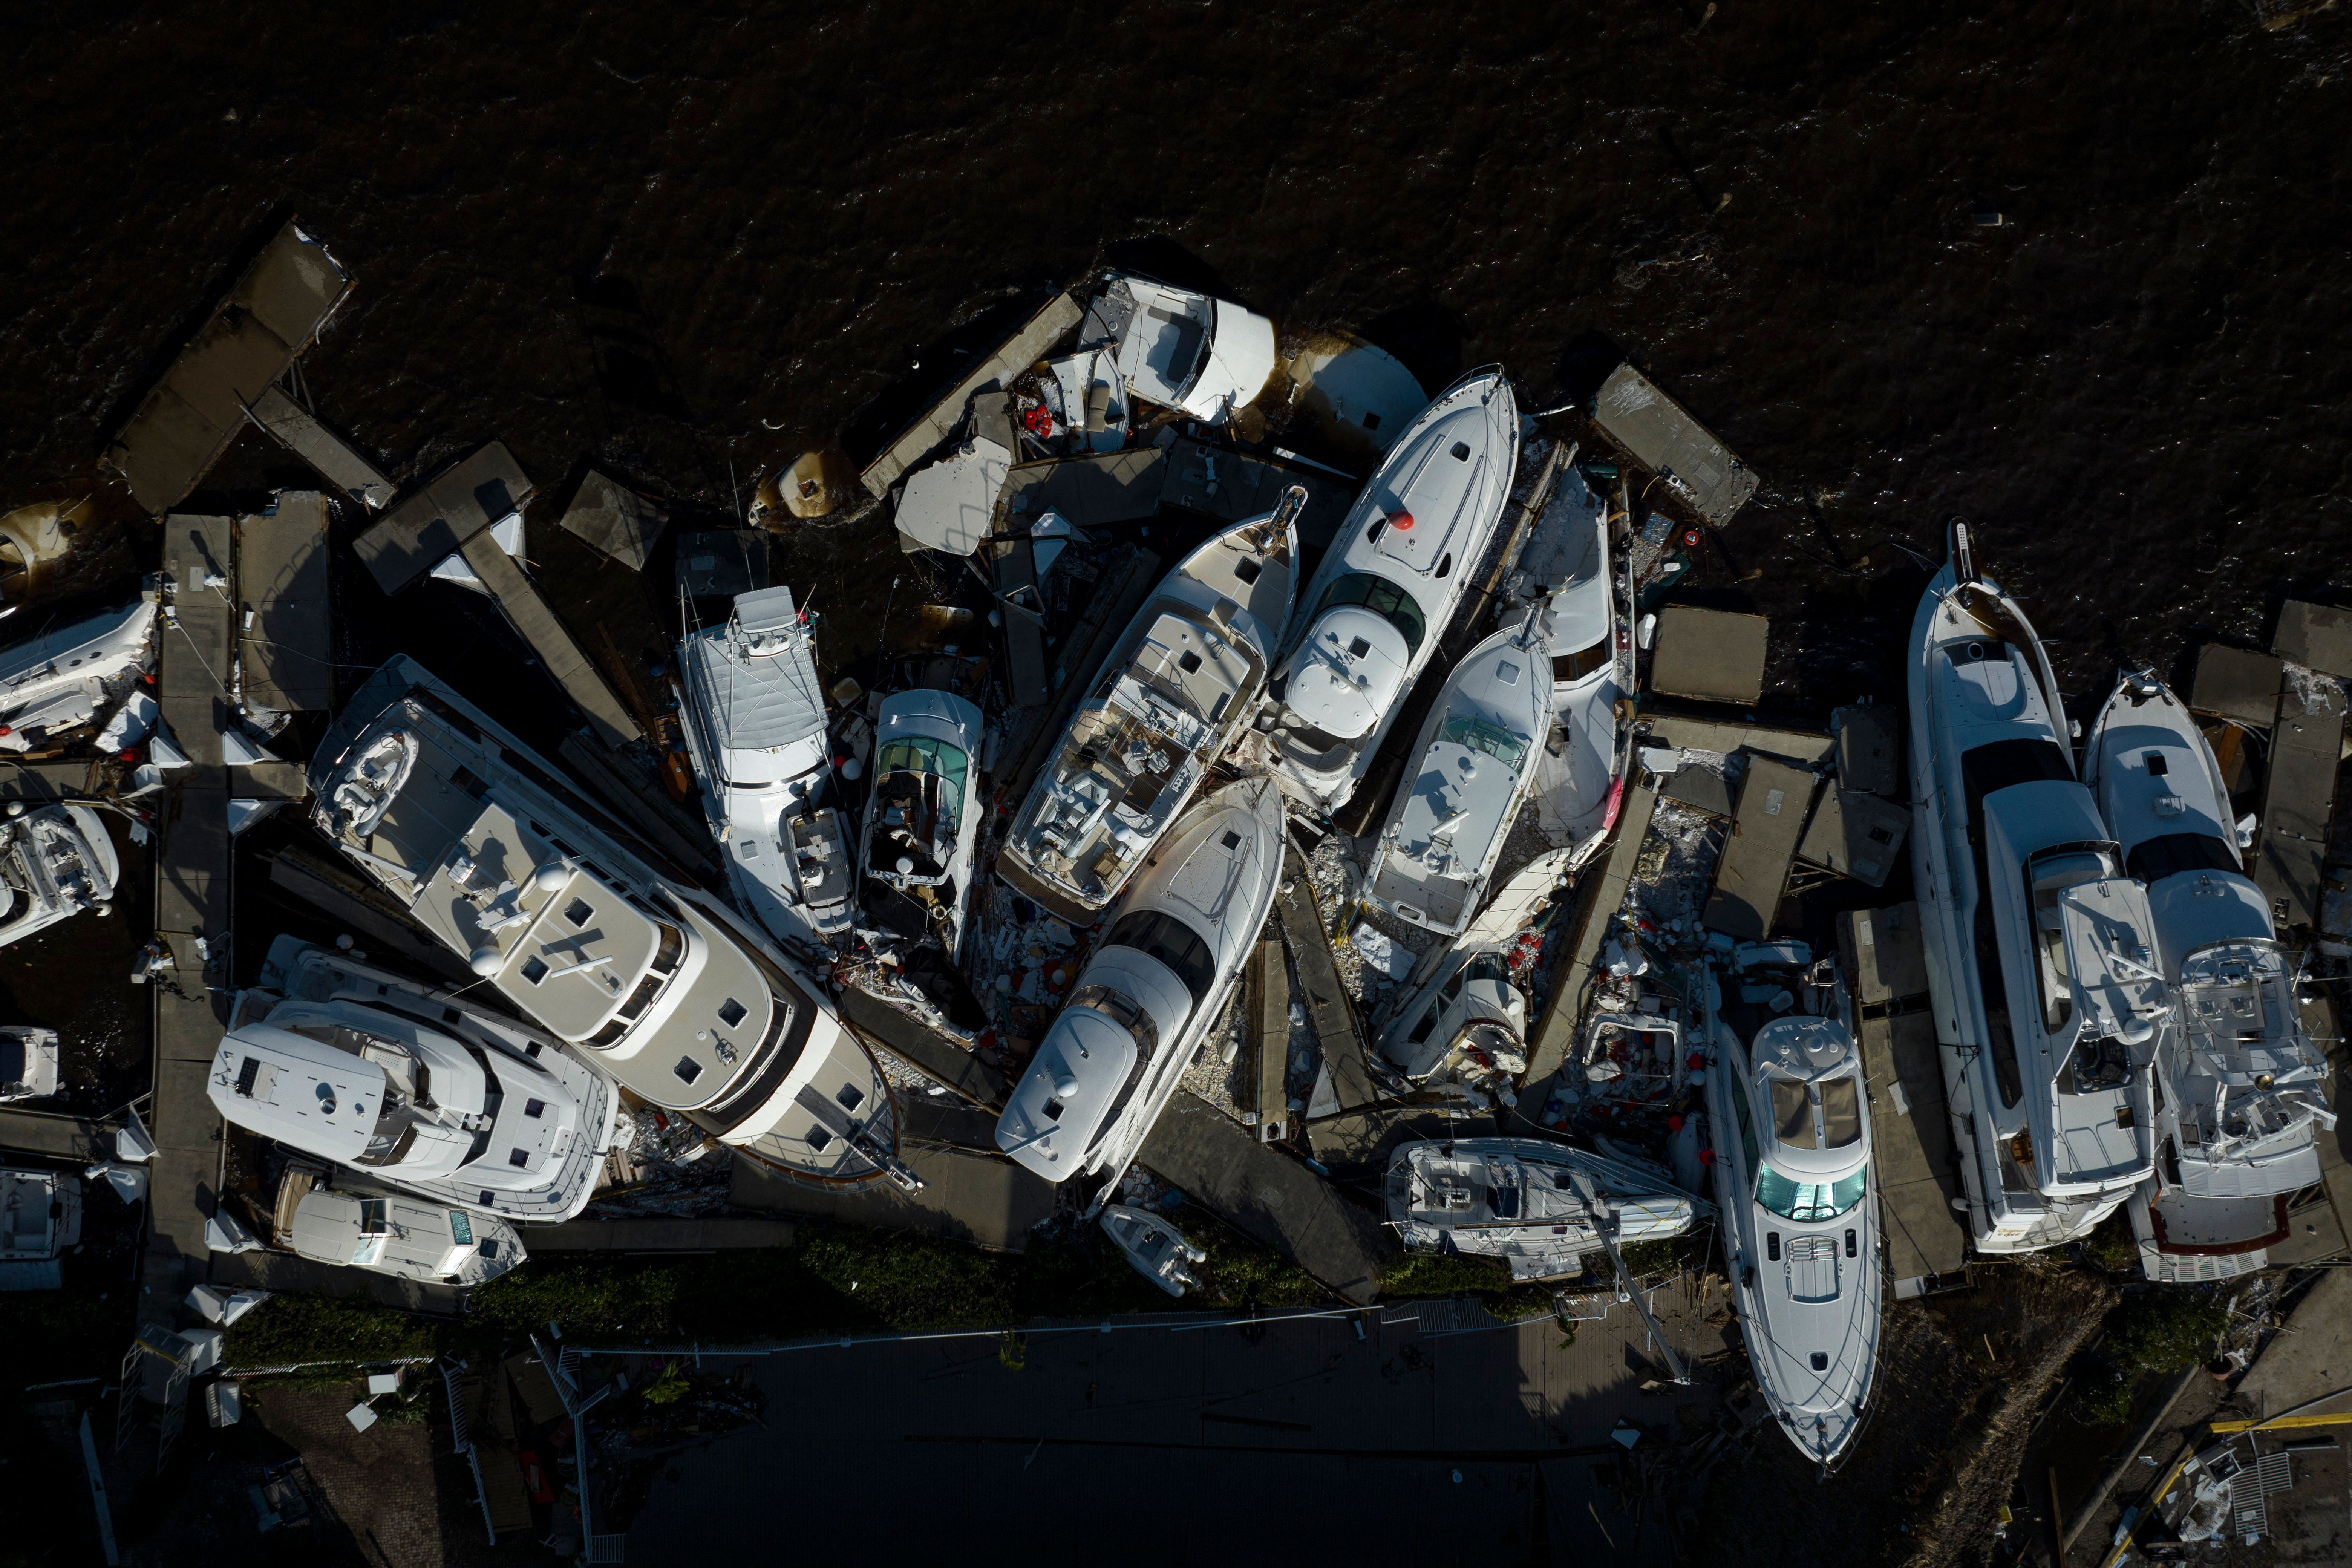 boats piled up on each other